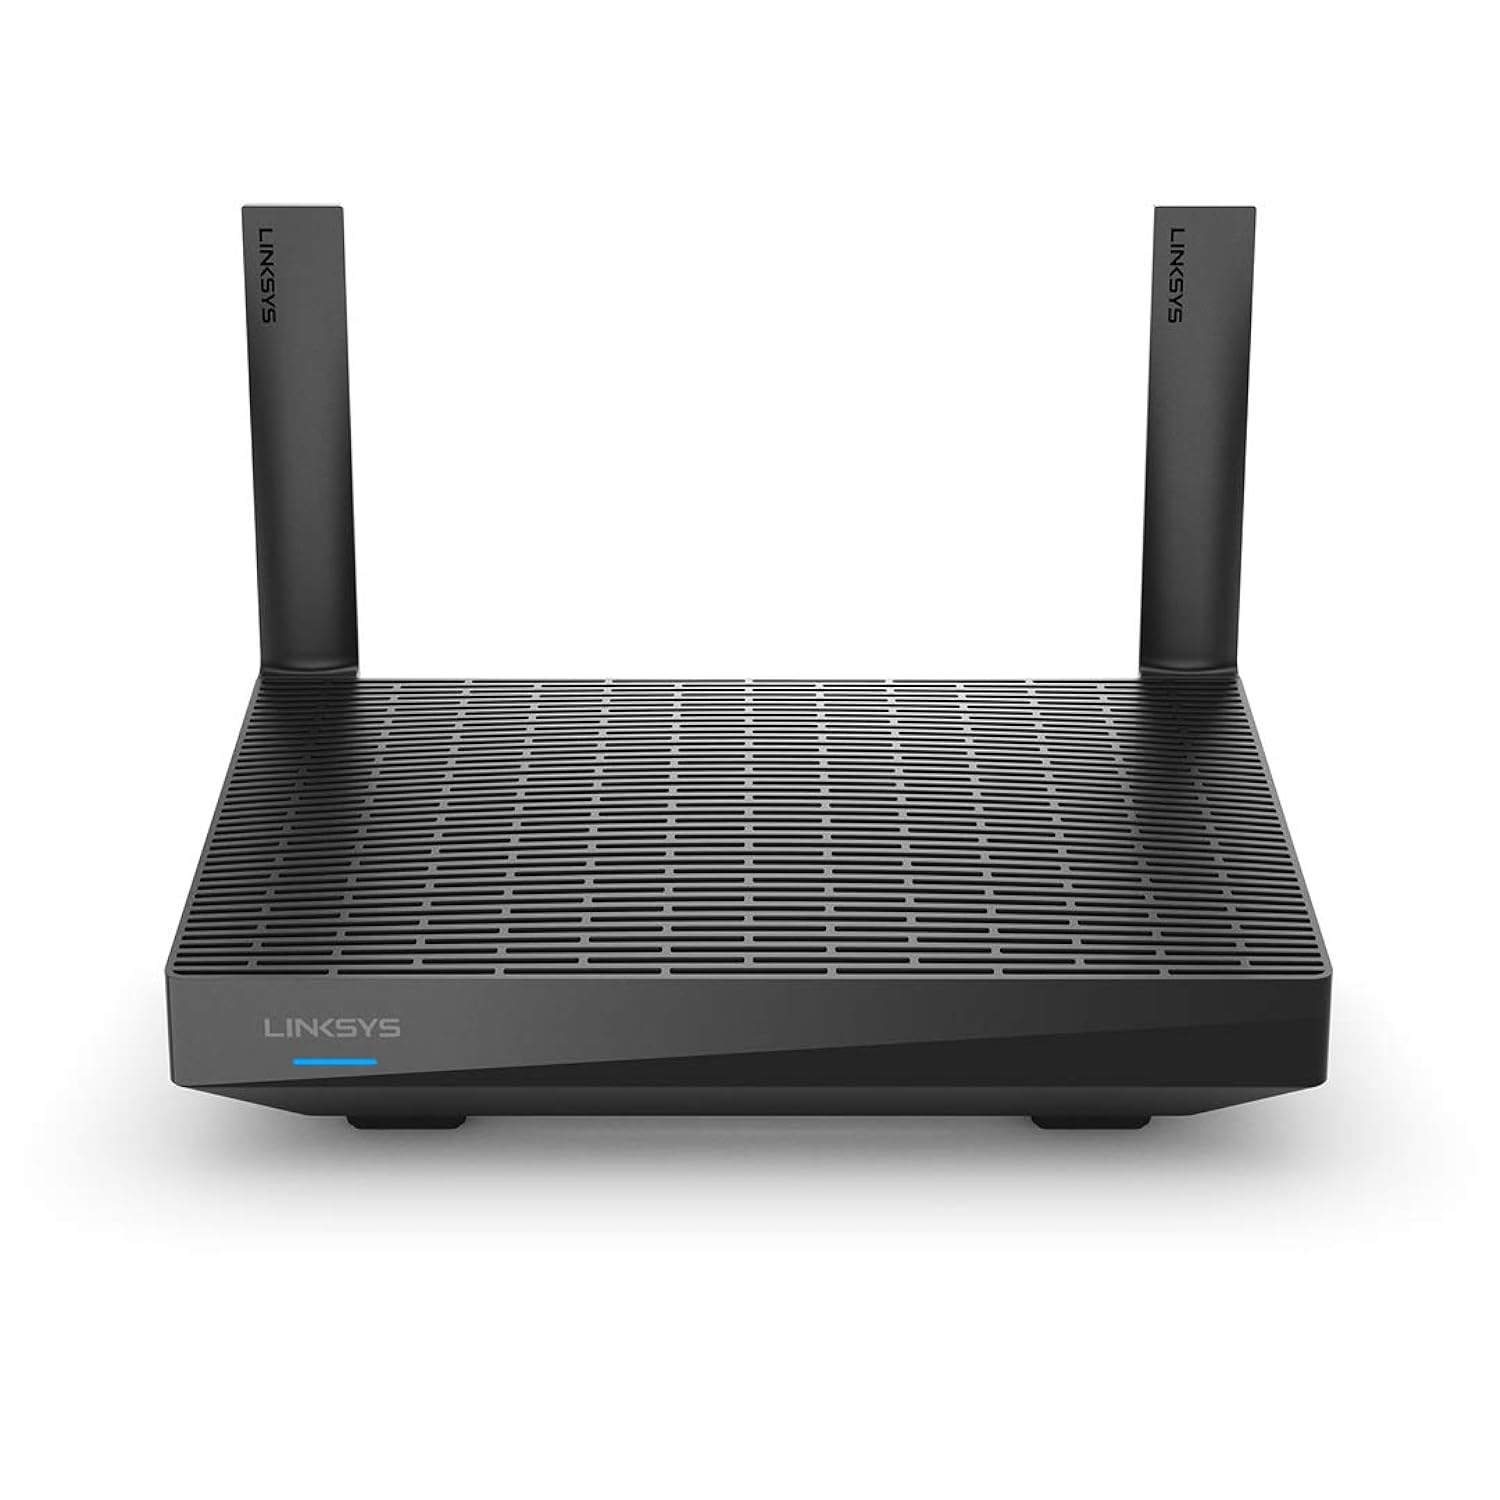 Linksys Mesh Wifi 6 Router, Dual-Band, 1,700 Sq. ft Coverage, 25+ Devices, Supports Guest WiFi, Parent Control, Speeds up to …